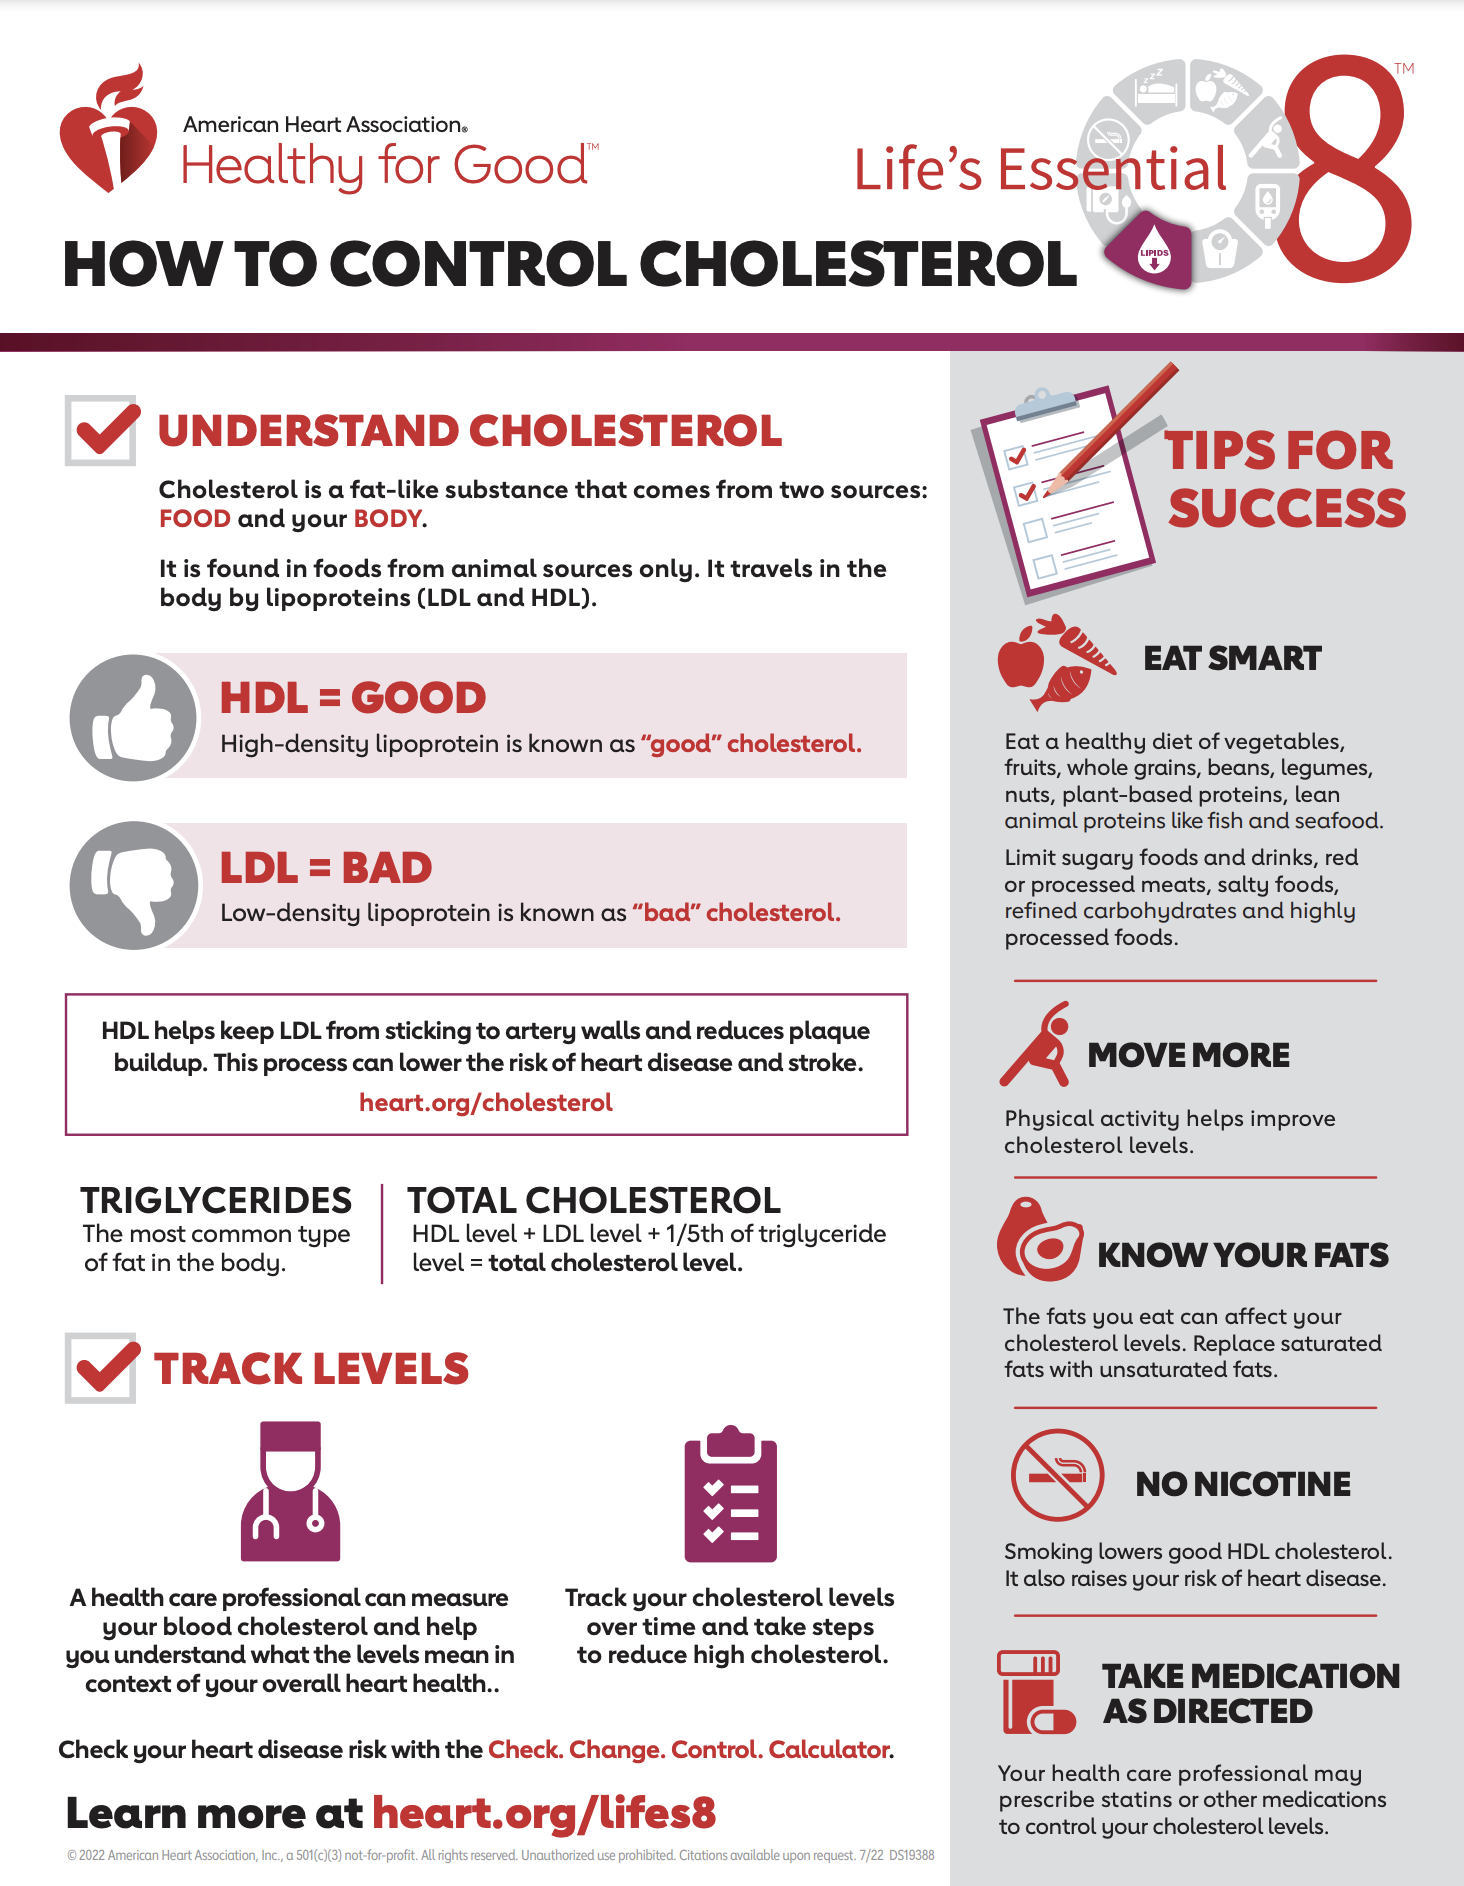 How to control cholesterol